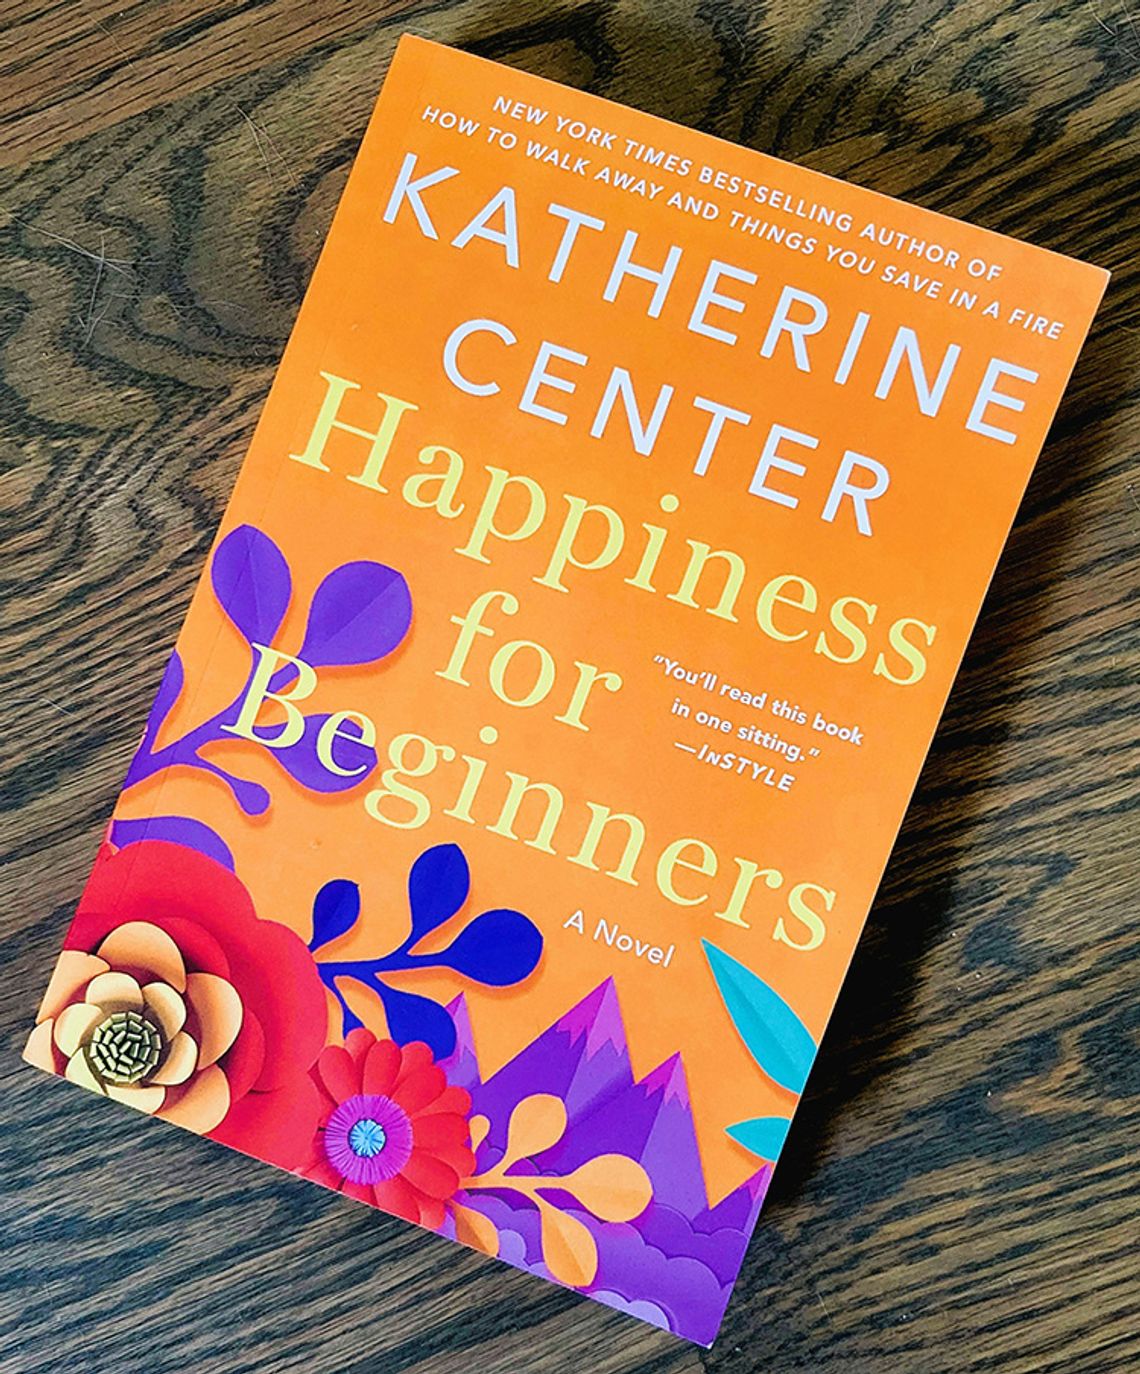 “Happiness for Beginners” by Katherine Center